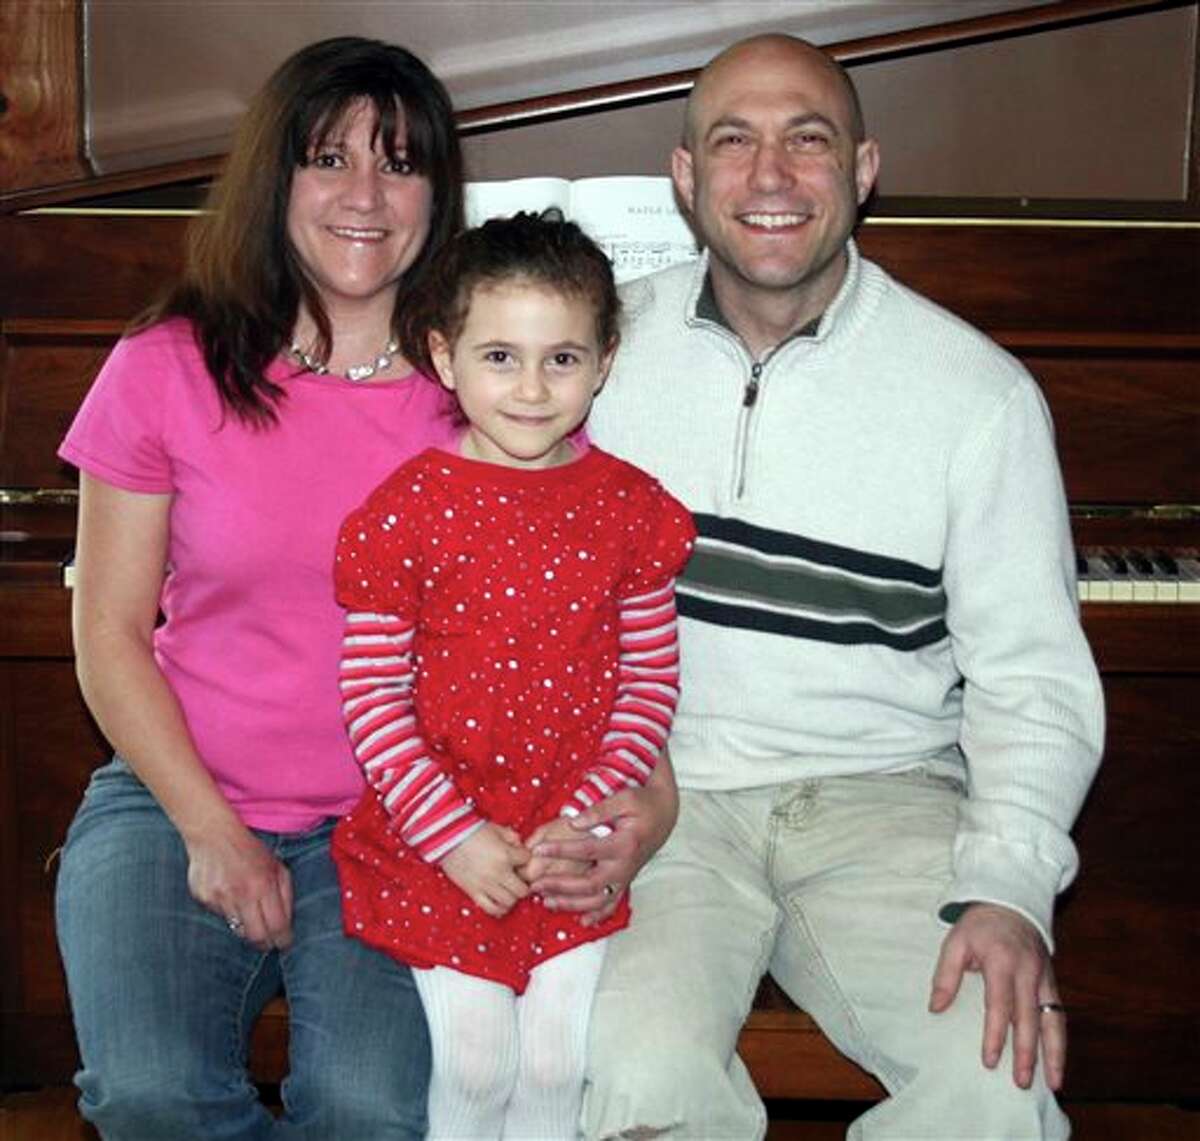 This undated photo provided by the Avielle Foundation shows Jeremy Richman, Jennifer Hensel and their daughter Avielle, 6, who was killed in the shooting massacre by Adam Lanza at Sandy Hook Elementary School in Newtown, Conn., on Dec. 14, 2012. As scientists, the couple wanted answers about what could lead a person to commit such violence. On Monday, April 15, 2013, they announced a scientific advisory board for the Avielle Foundation, which was established with the goal of reducing violence. (AP Photo/The Avielle Foundation)